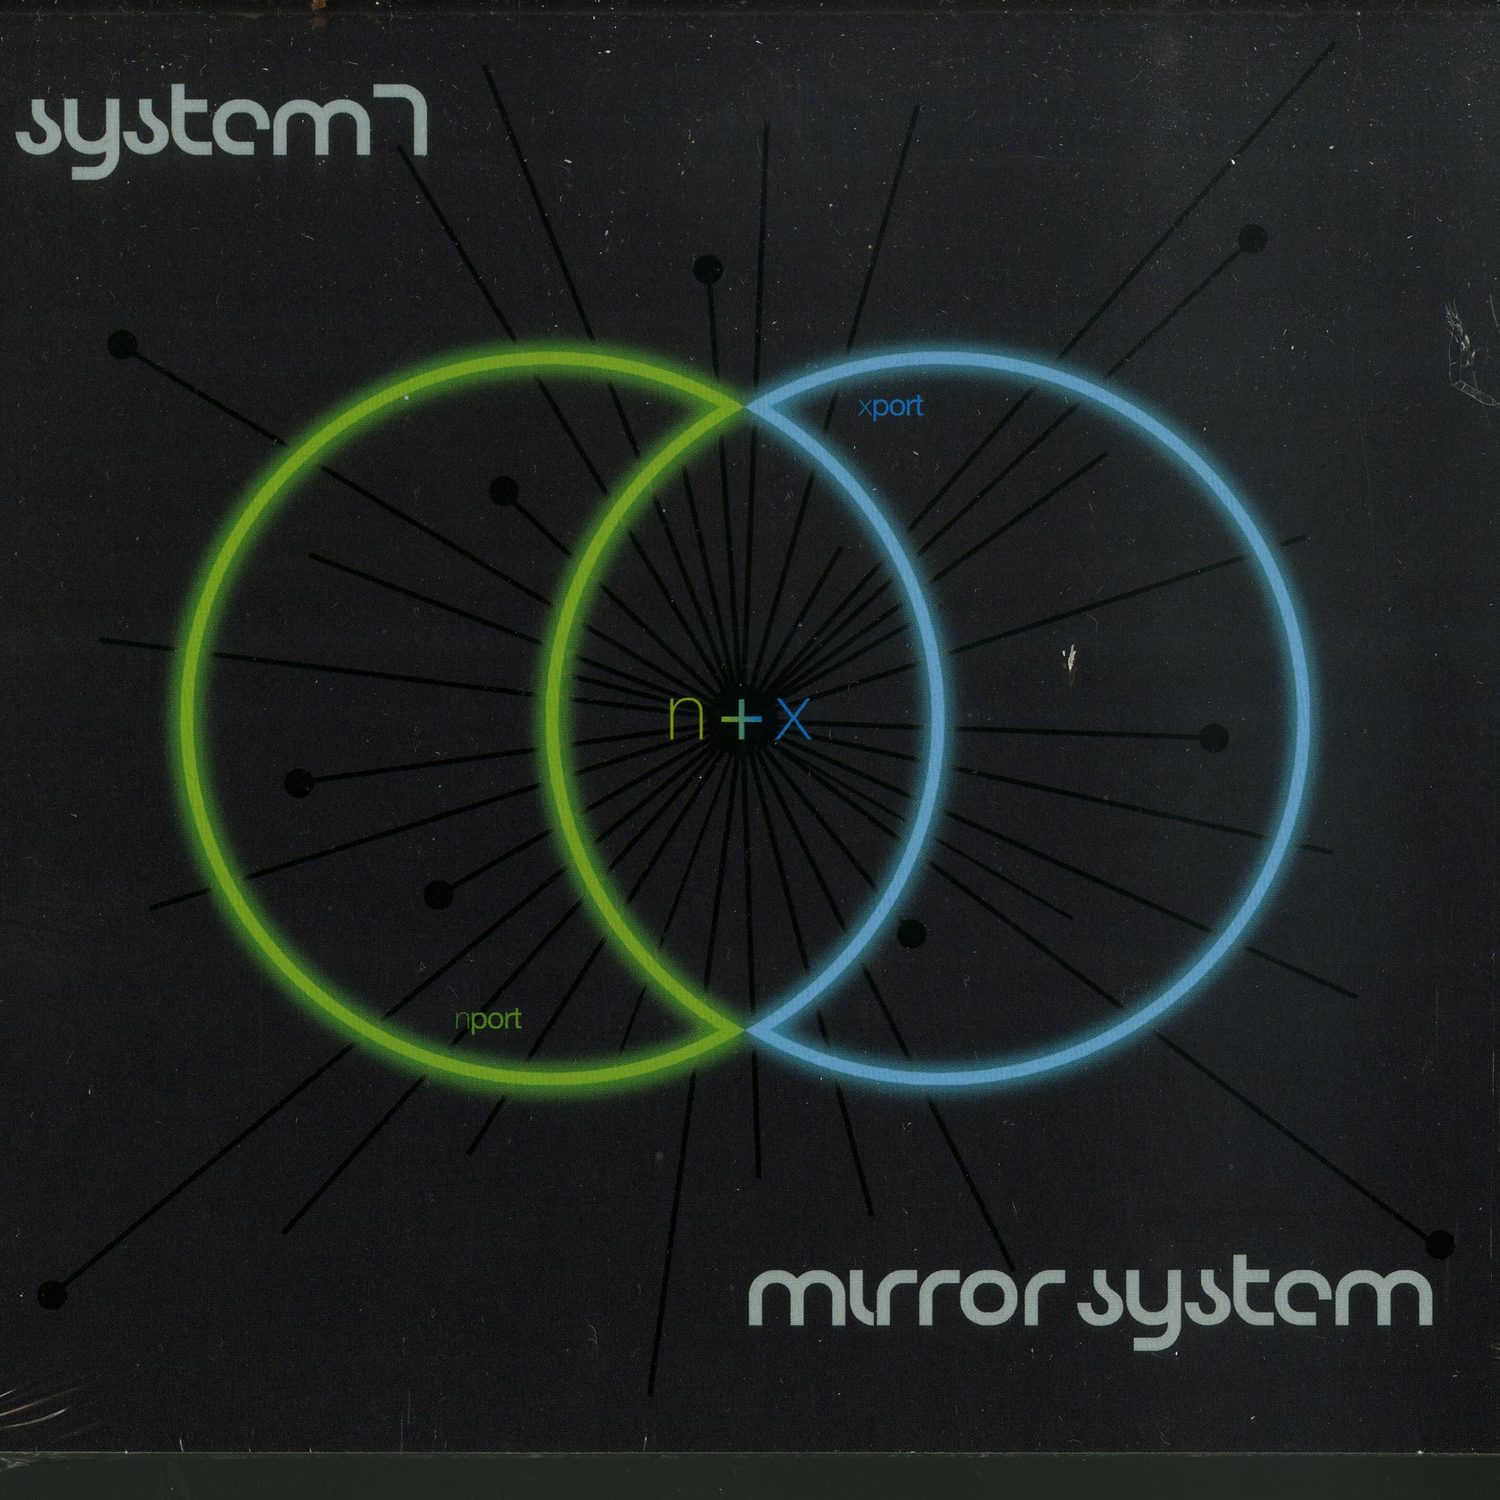 System 7 & Mirror System - N AND X 